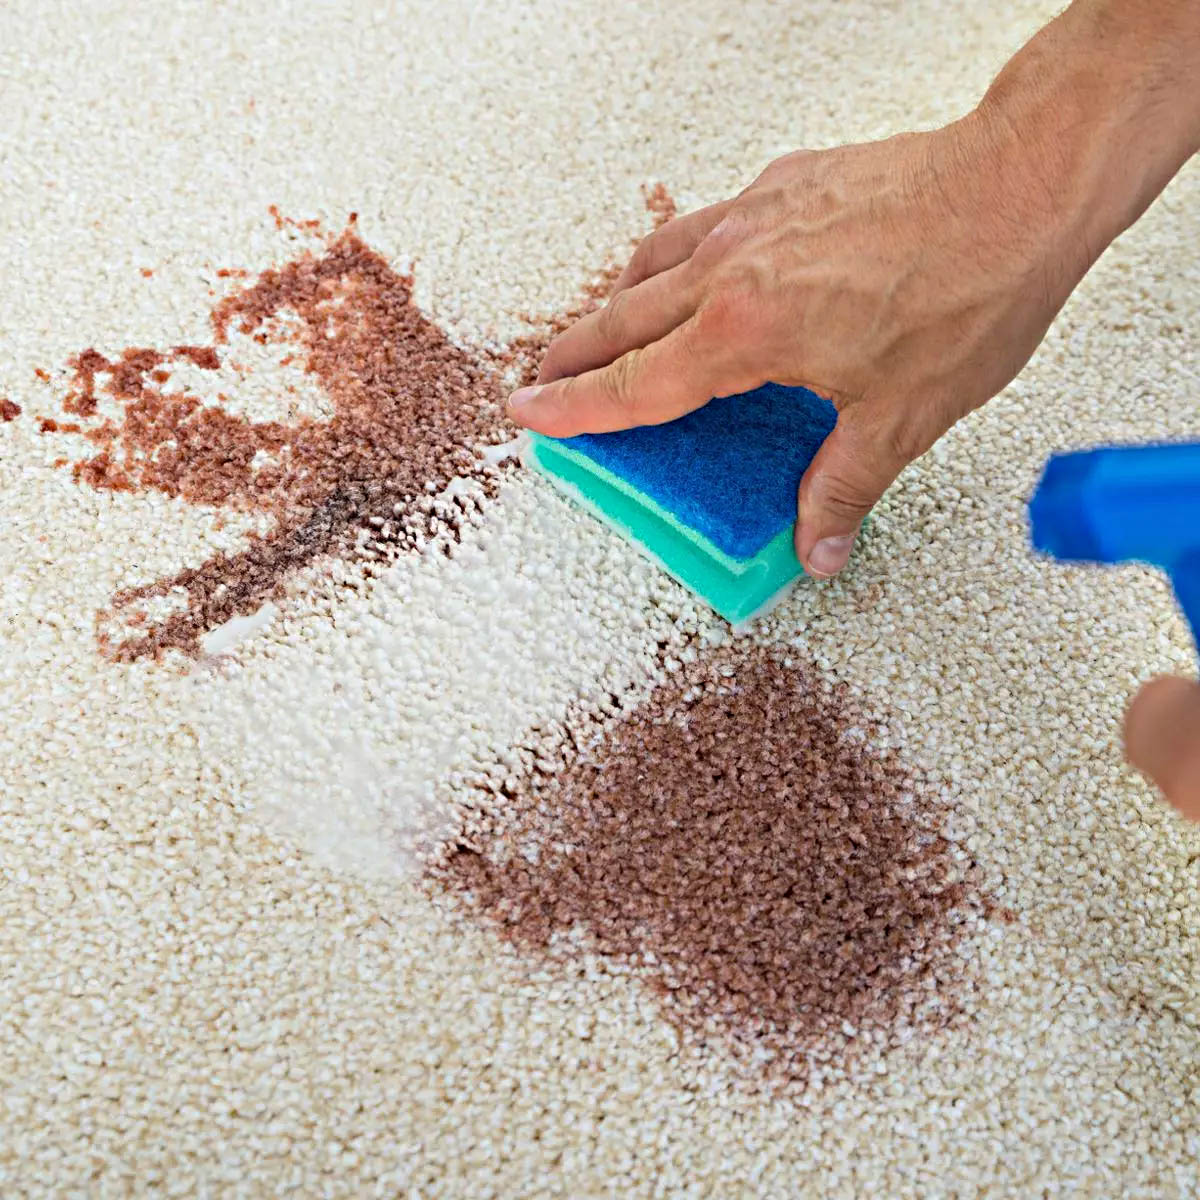 How To Get Dried Resin Out Of The Carpet